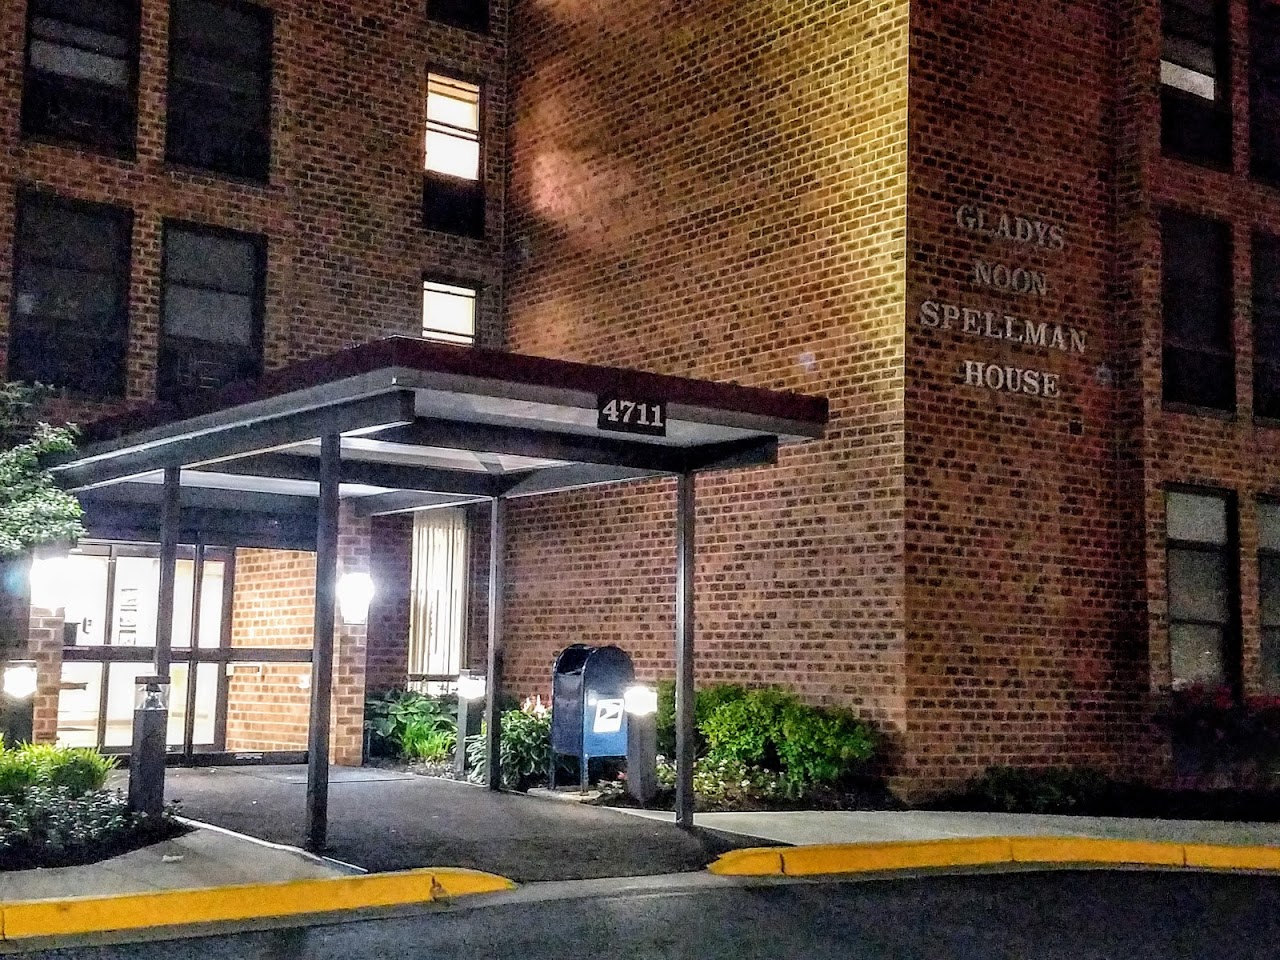 Photo of SPELLMAN HOUSE APTS at 4711 BERWYN HOUSE RD COLLEGE PARK, MD 20740